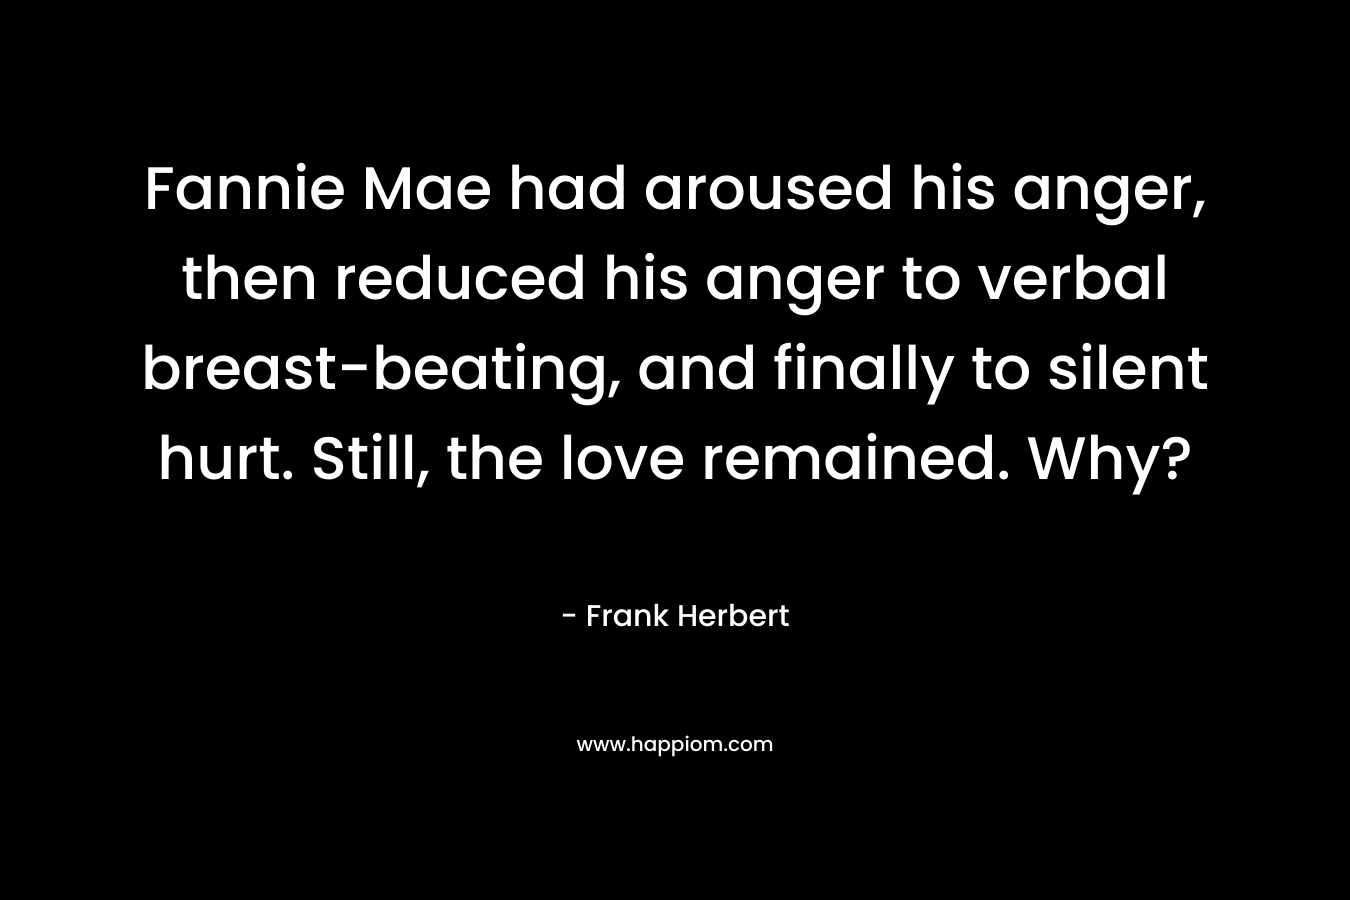 Fannie Mae had aroused his anger, then reduced his anger to verbal breast-beating, and finally to silent hurt. Still, the love remained. Why? – Frank Herbert